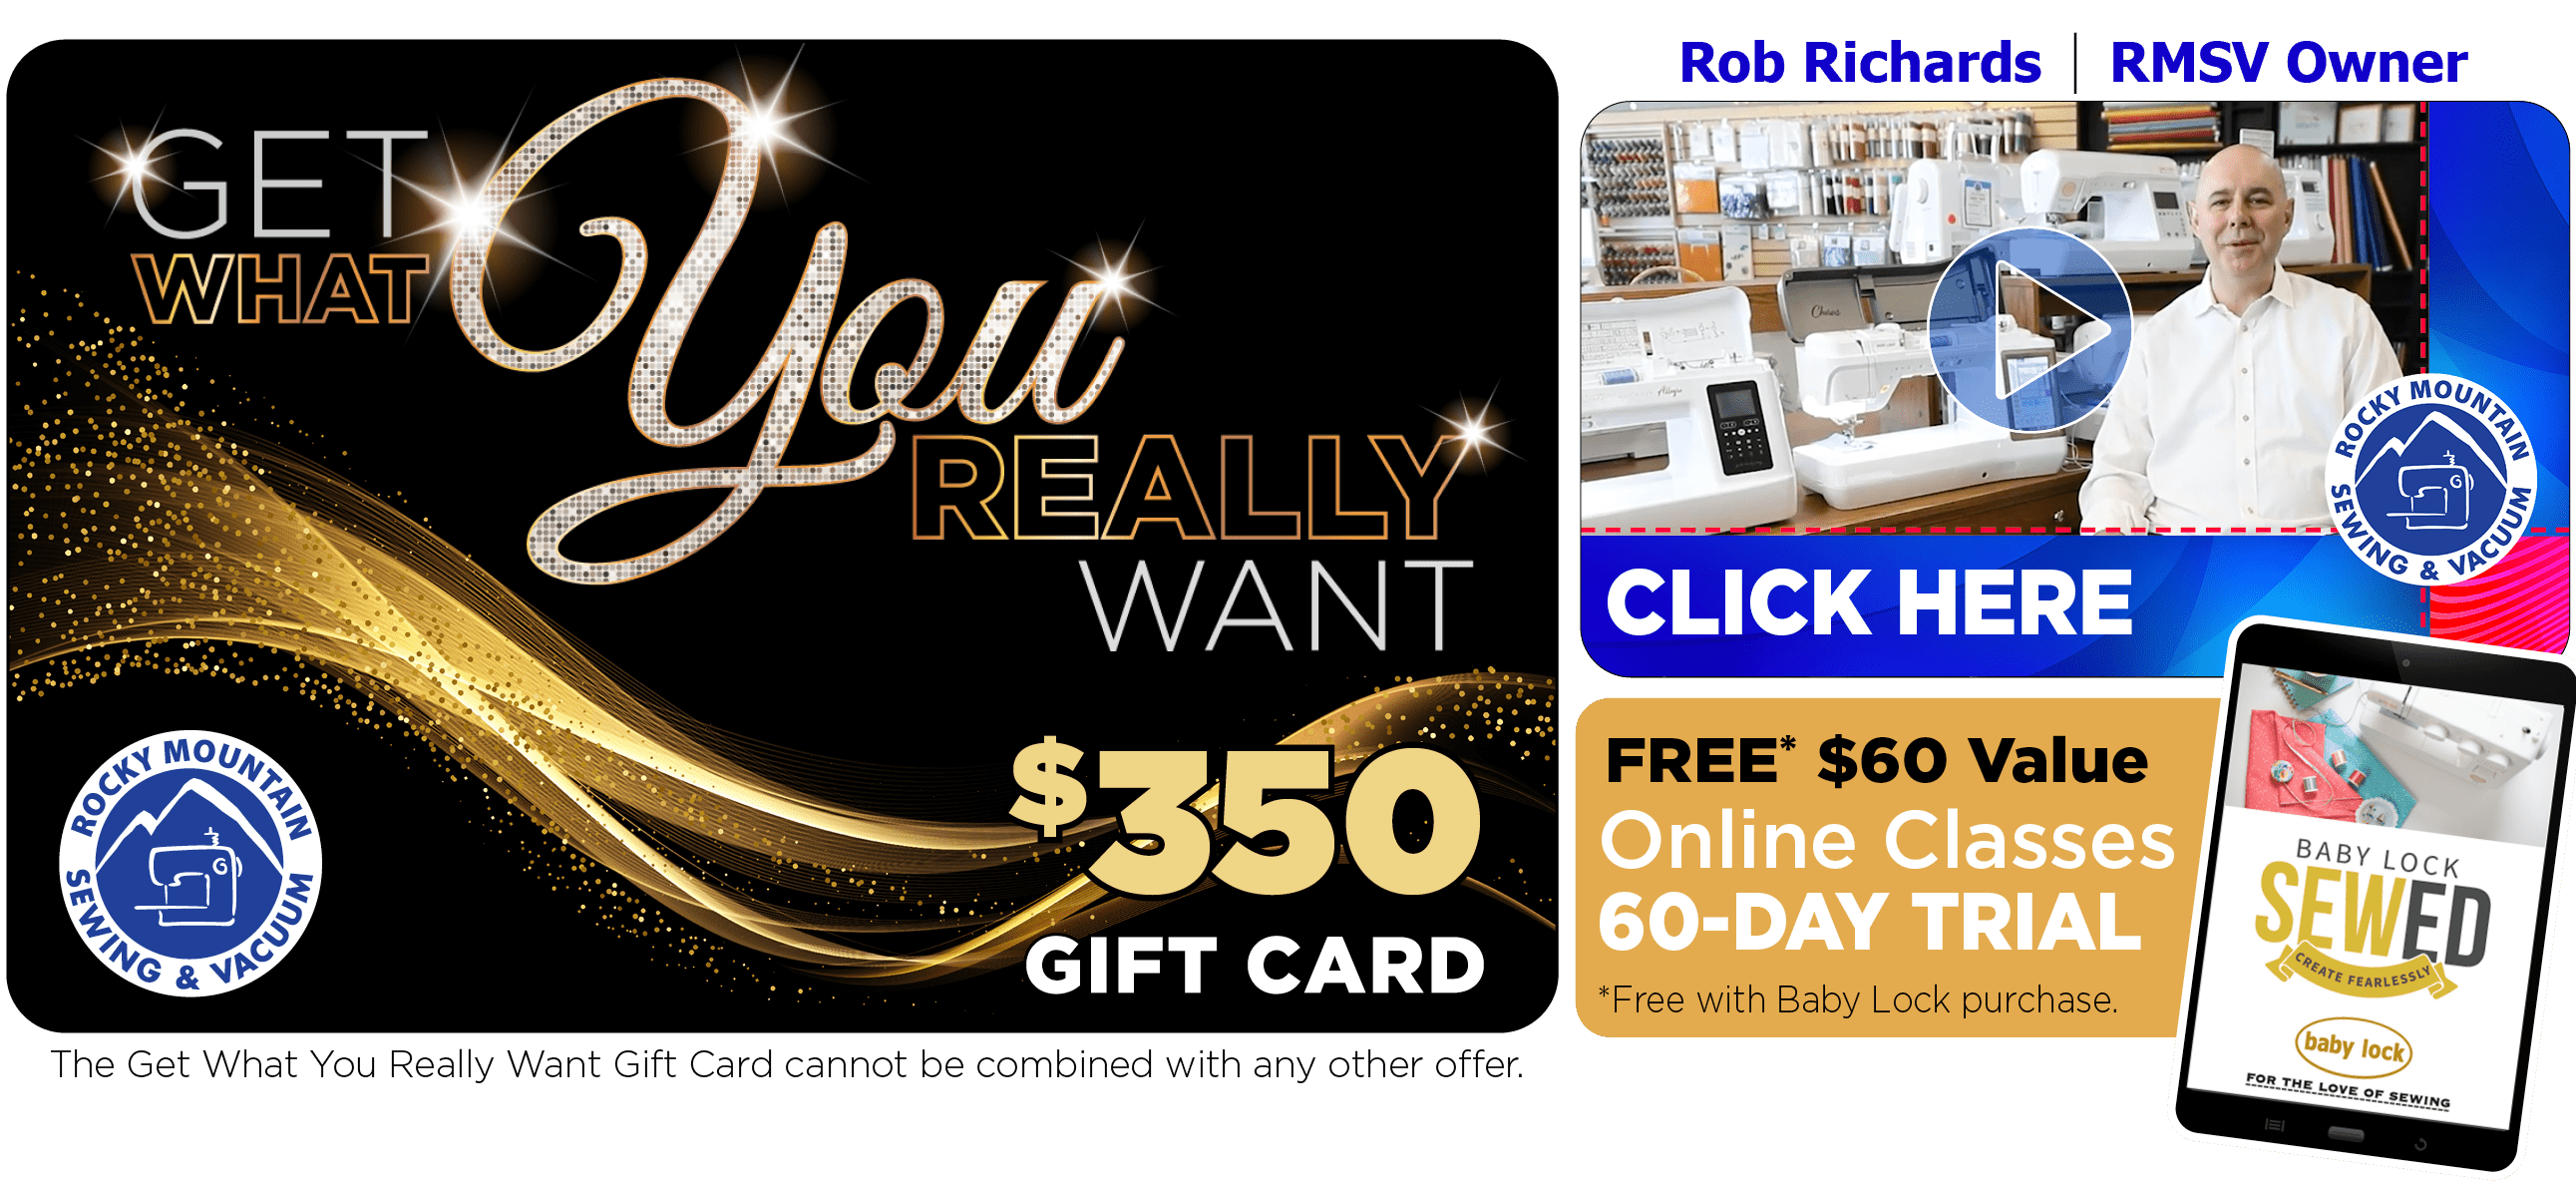 Get What You Really Want $350 Gift Card with Purchase